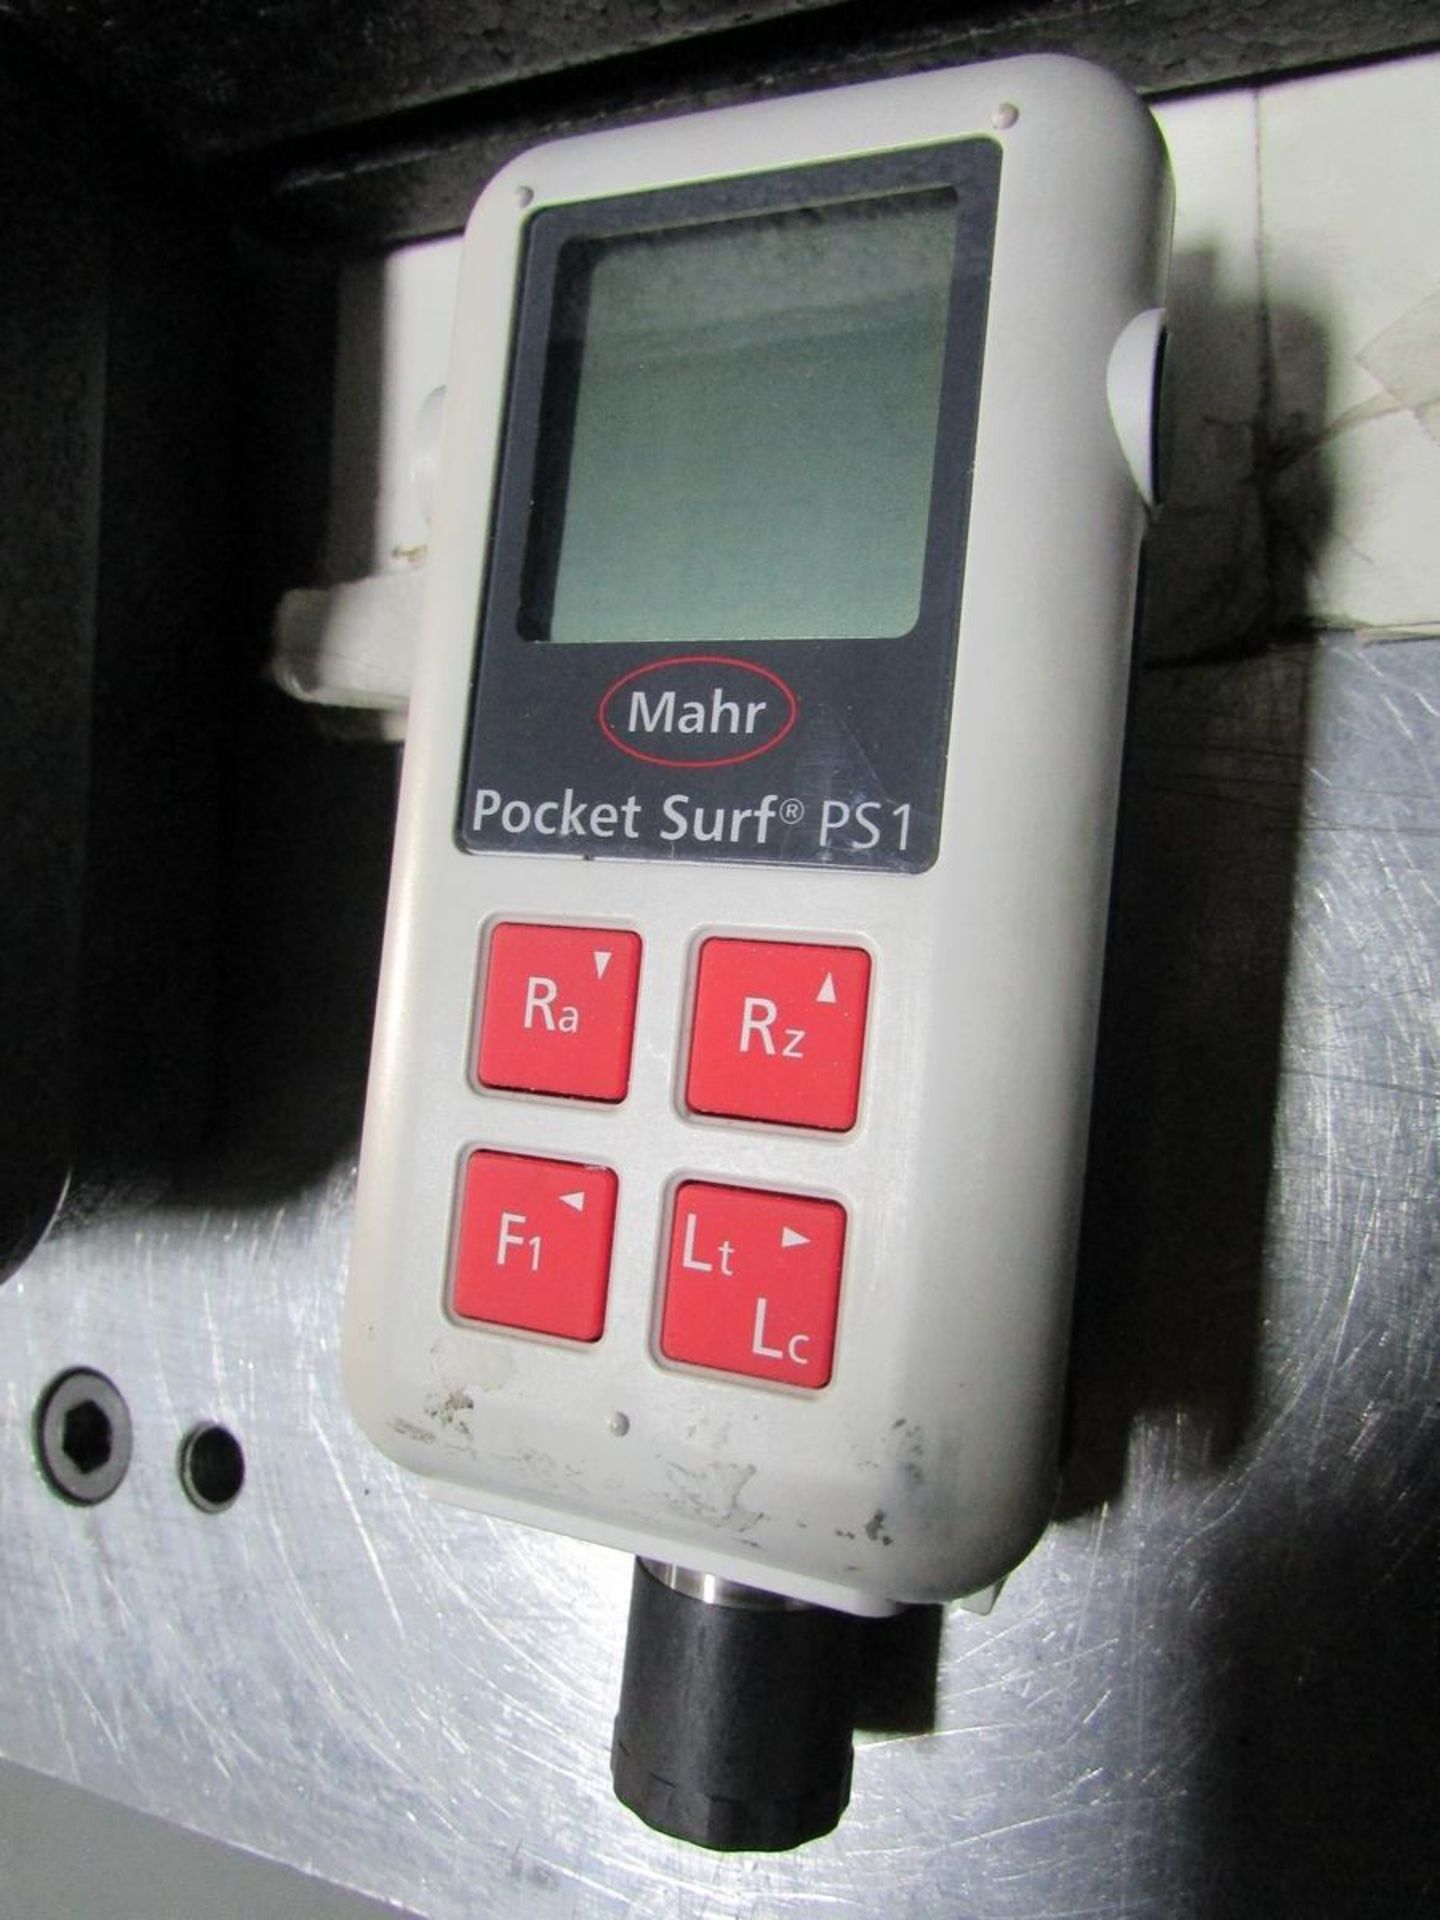 LOT - (2) SURFACE ROUGHNESS TESTERS: (1) FEDERAL POCKET SURF III, (1) MAHR POCKET SURF PS1 - Image 3 of 3